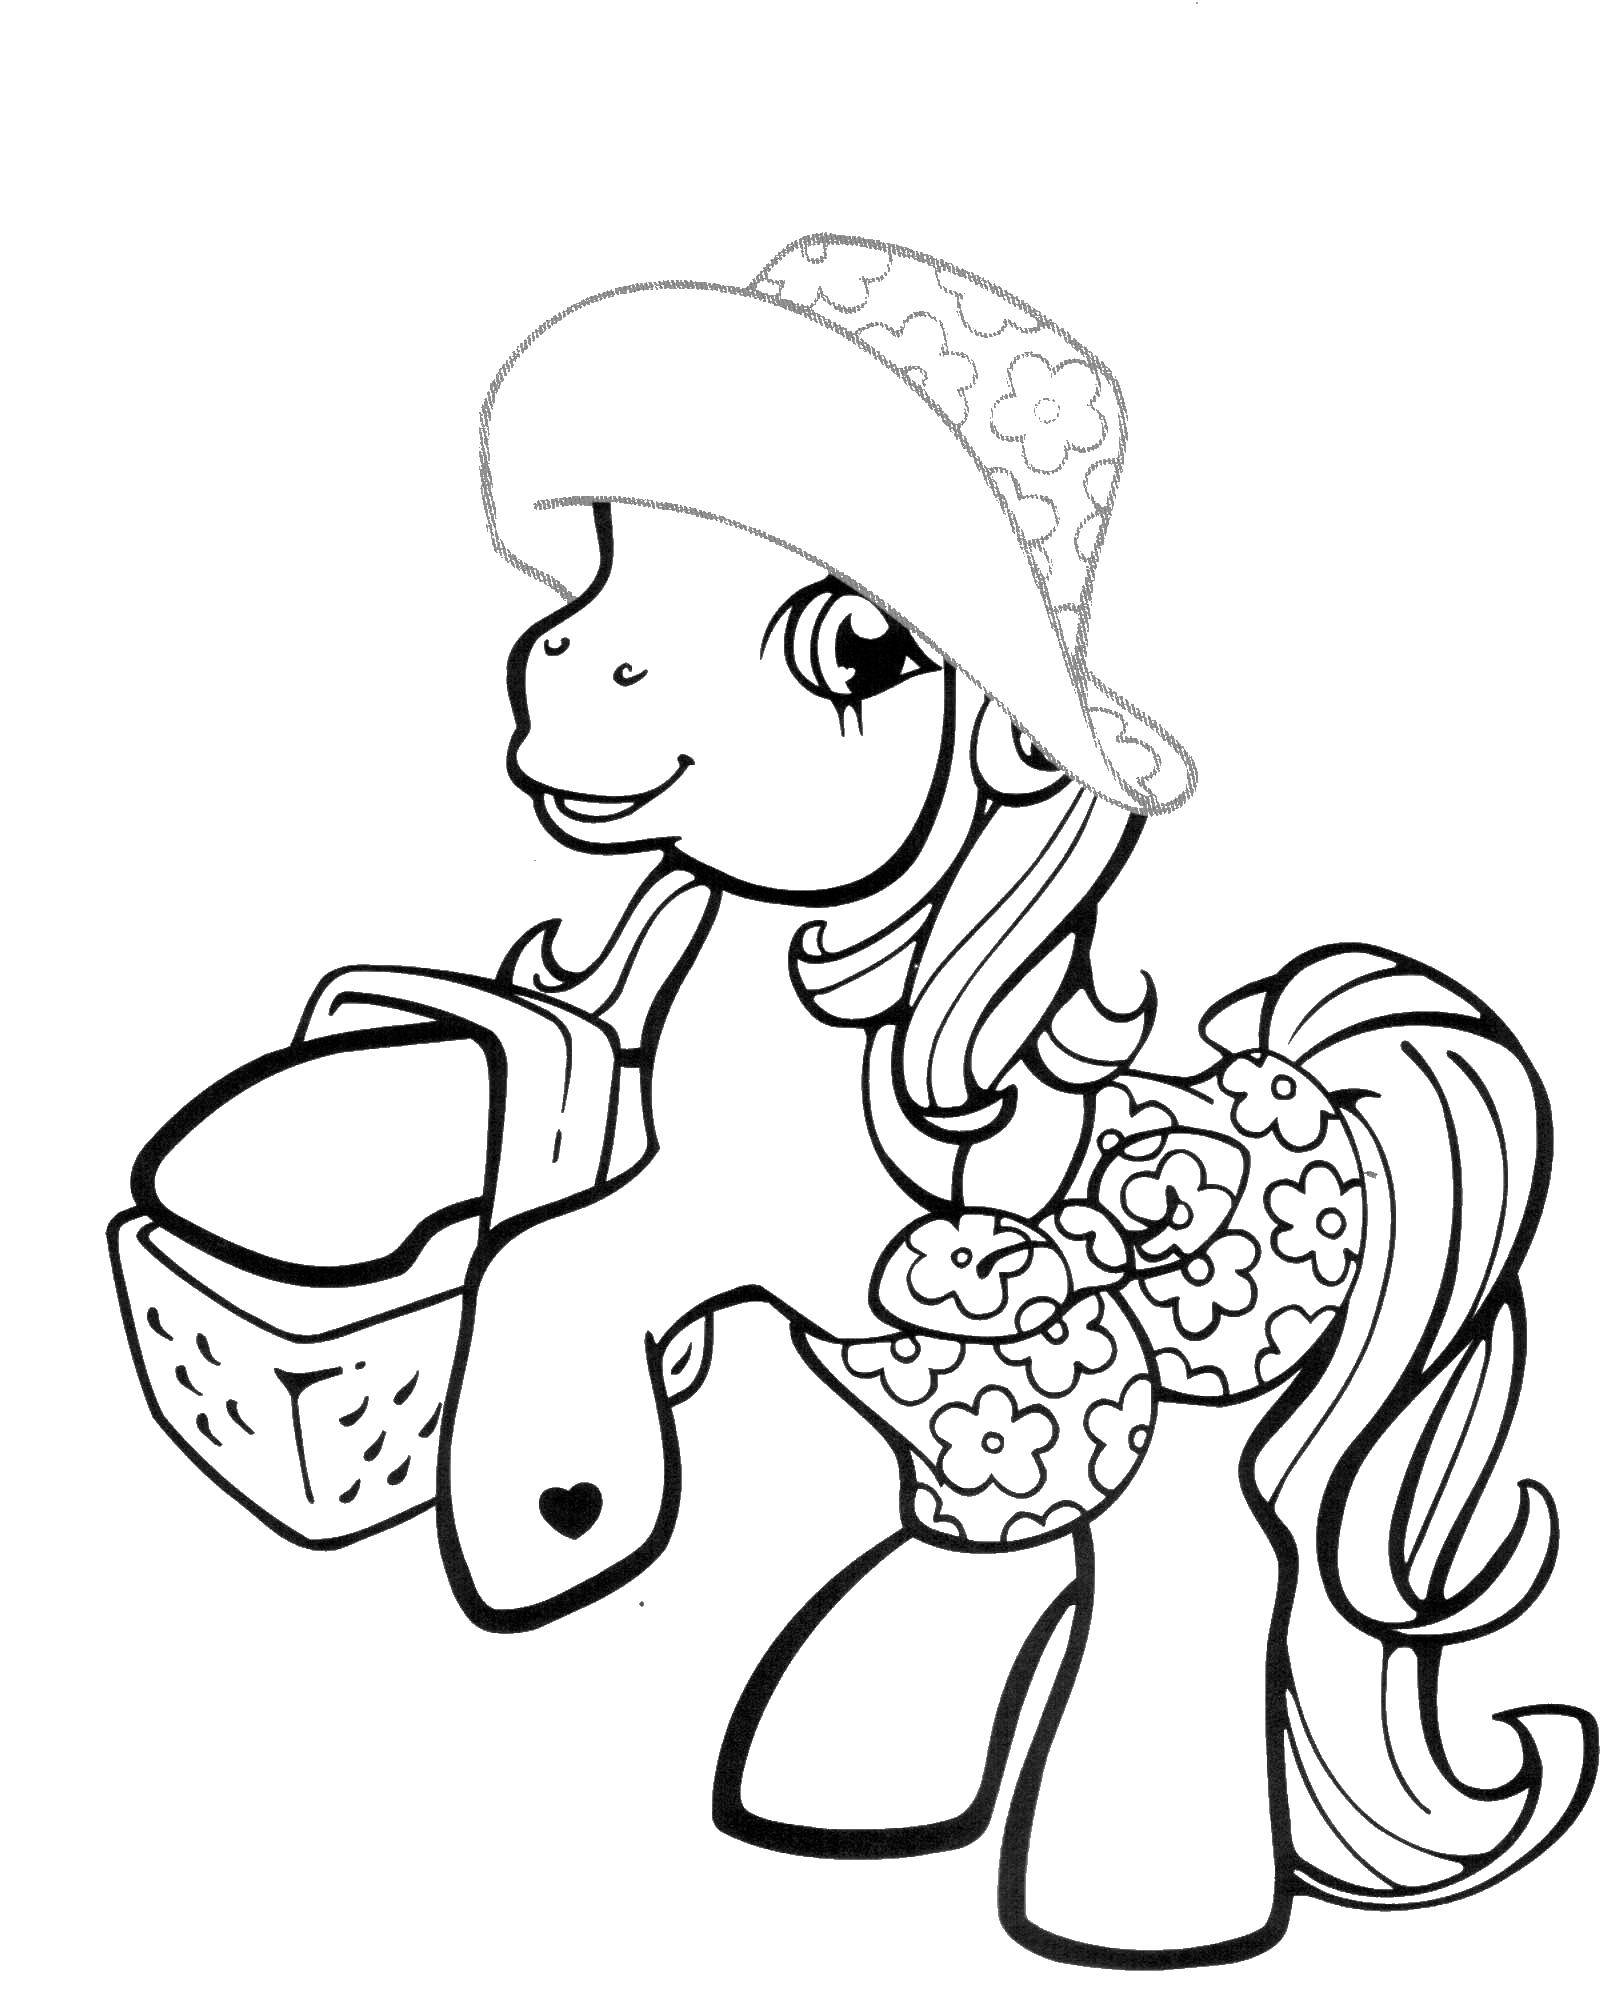 Coloring Pony goes on a picnic. Category Ponies. Tags:  pony, unicorn.